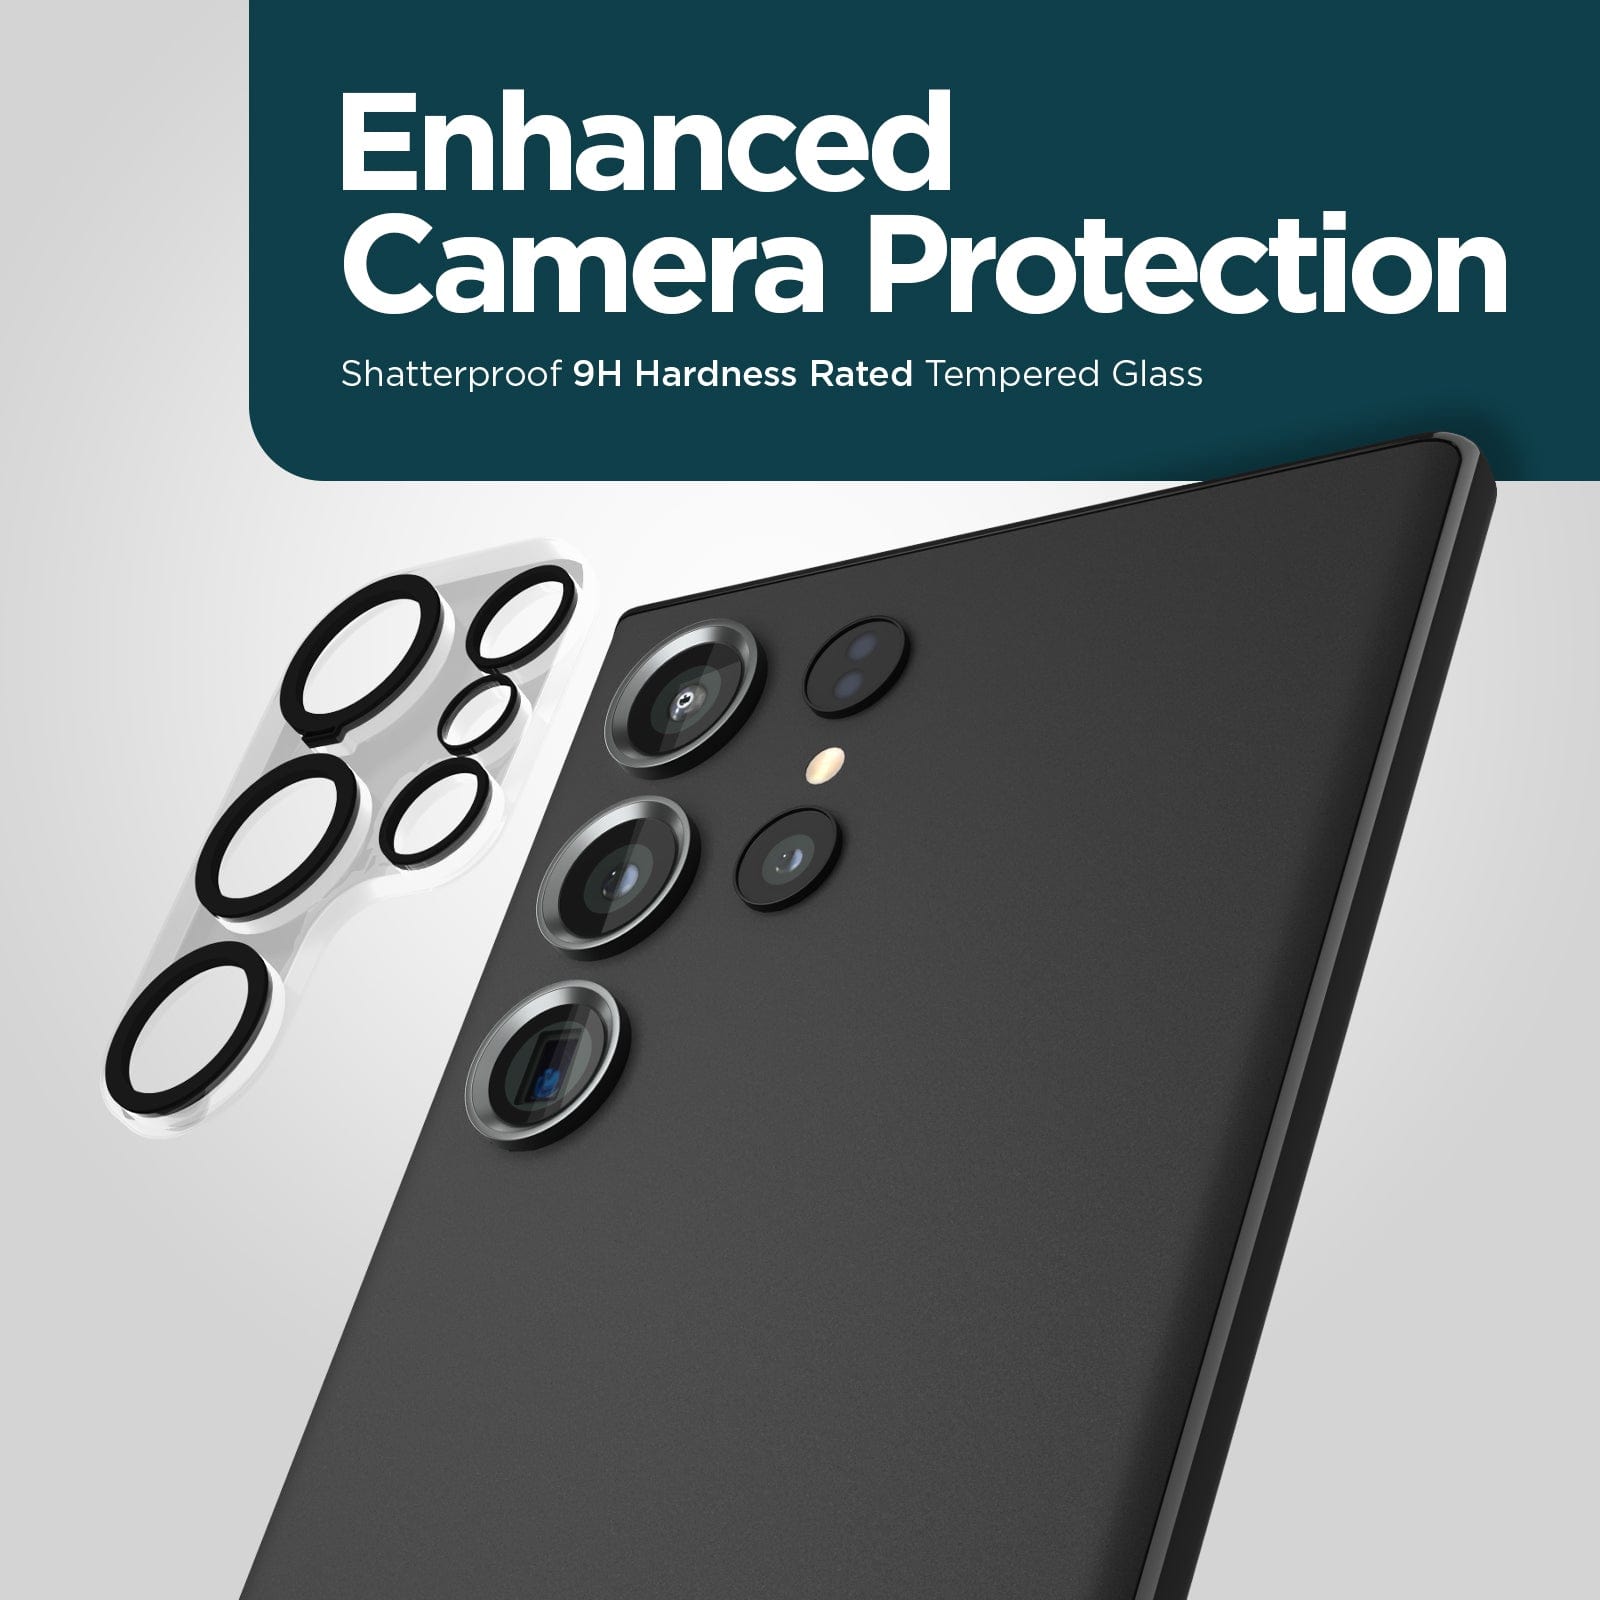 ENHANCED CAMERA PROTECTION. SHATTERPROOF 9H HARDNESS RATED TEMPERED GLASS. 